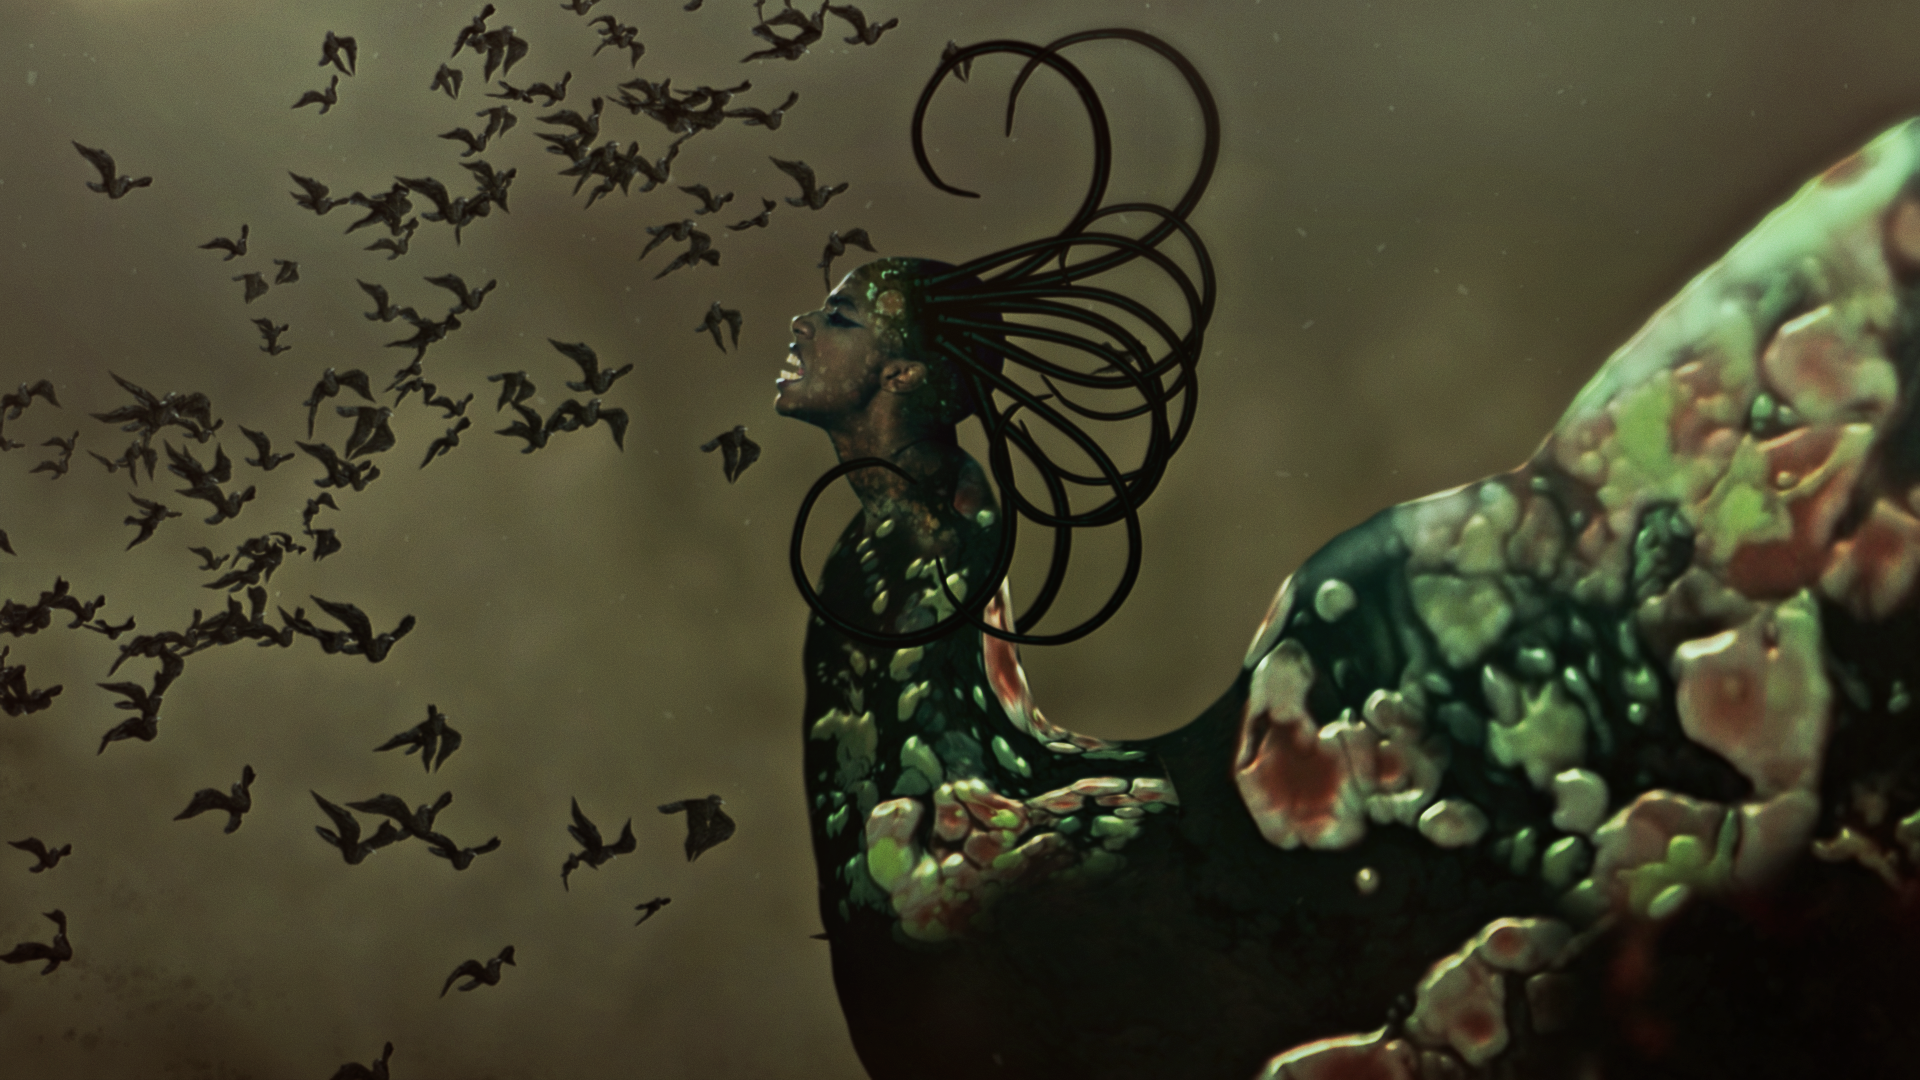 Surrealistic image of a figure with the head of a black person with long curved wires as hair and a heavy, elongated and limbless body, of dark green tones and with white and red spots. The figure is facing left and from that direction, there is a flock of birds flying in their direction